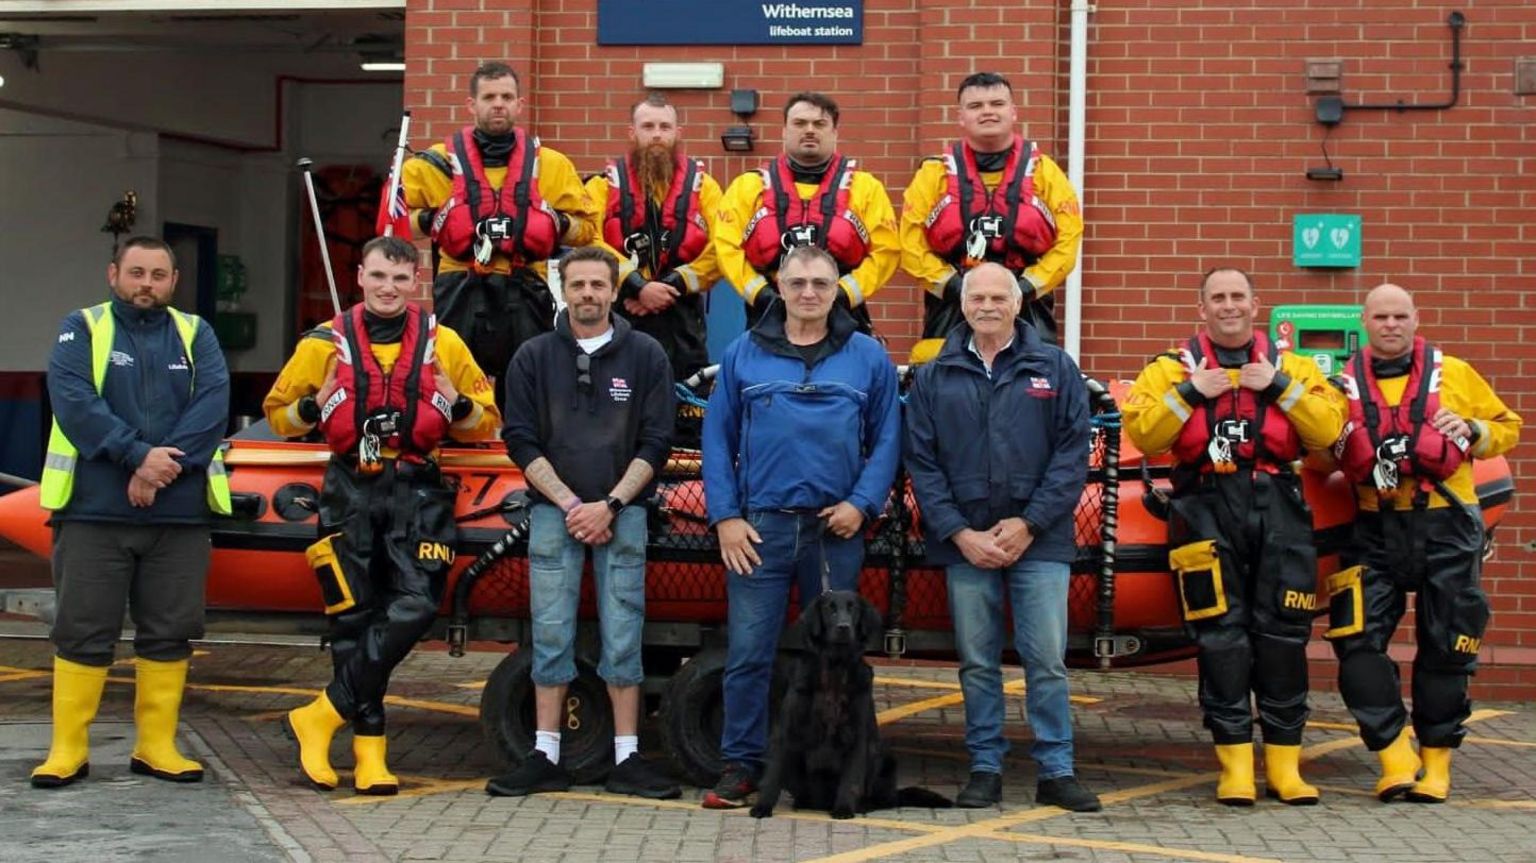 RNLI Withernsea